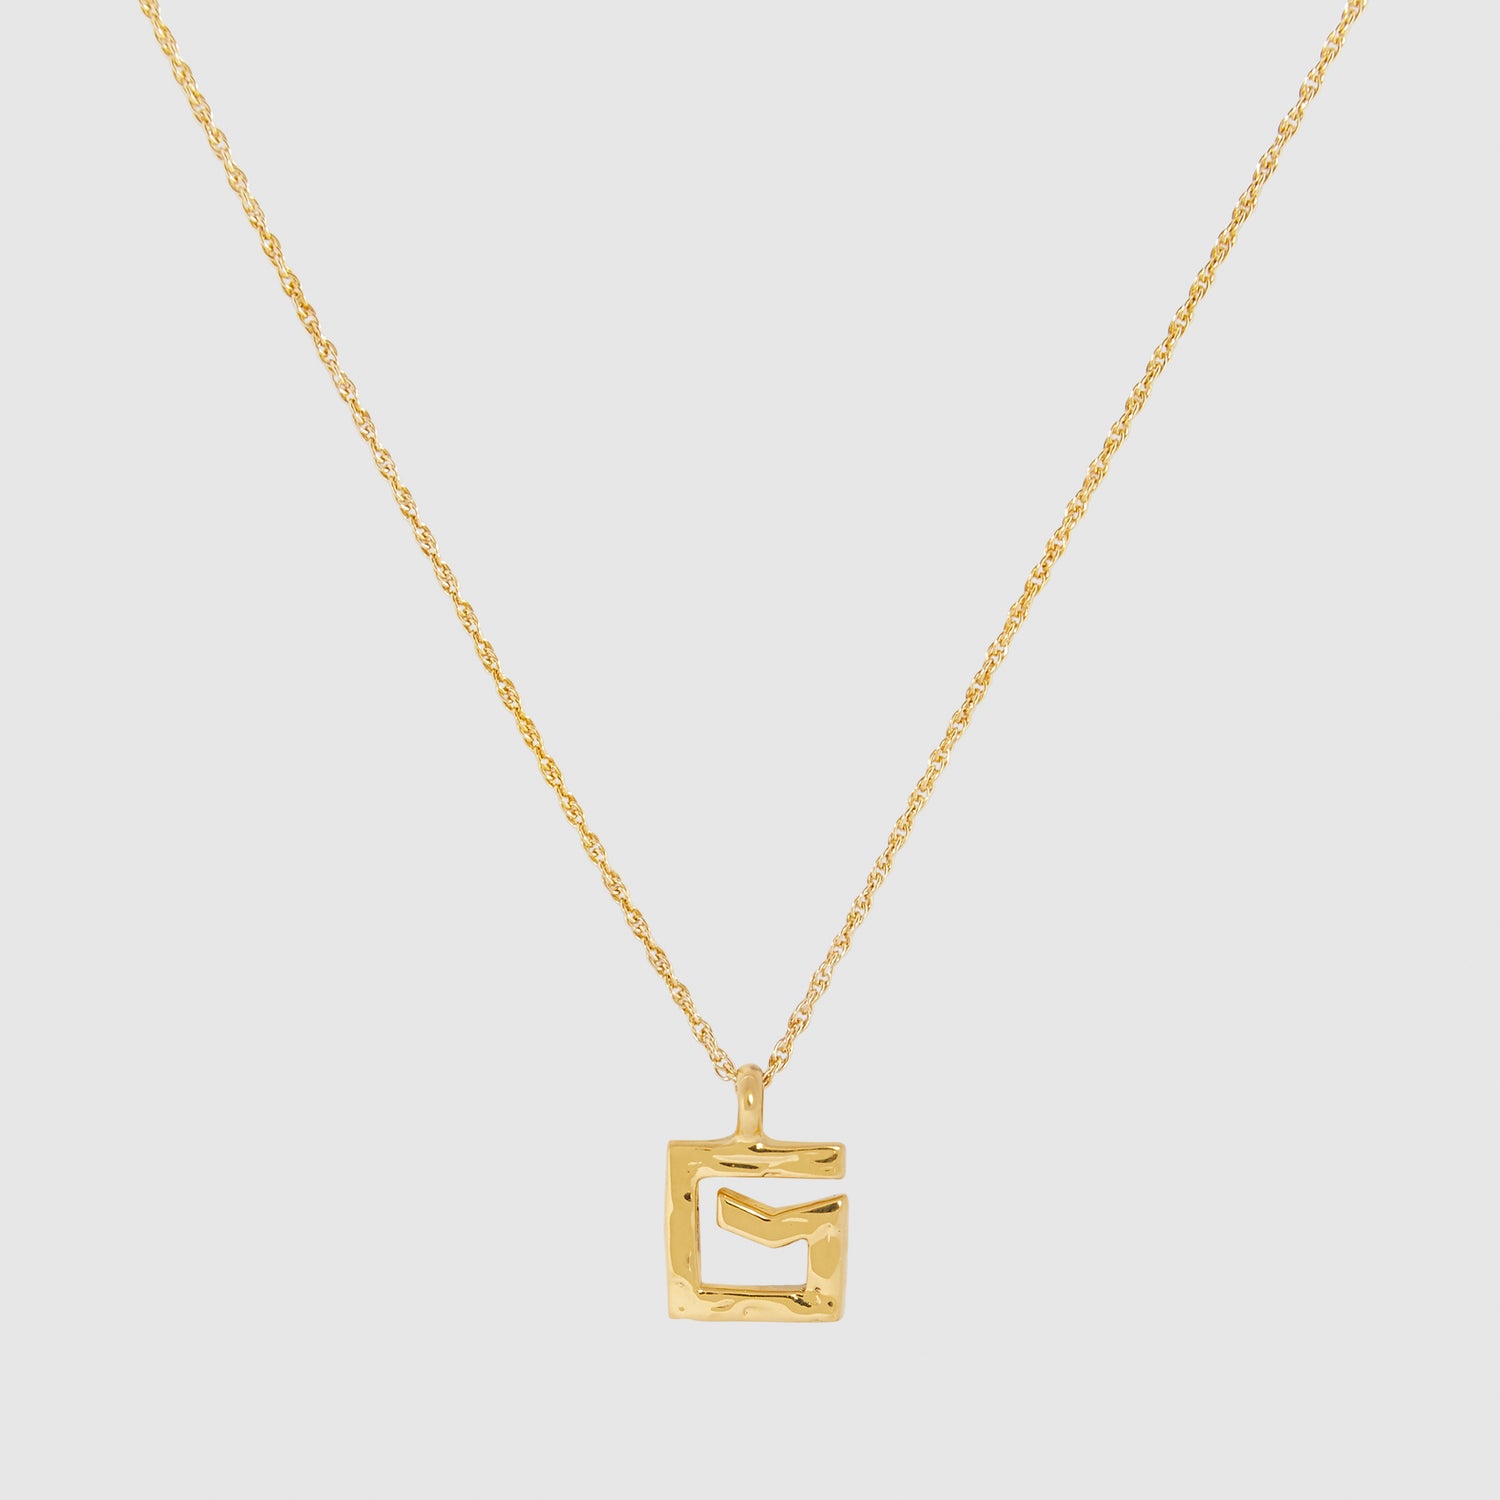 G Necklace